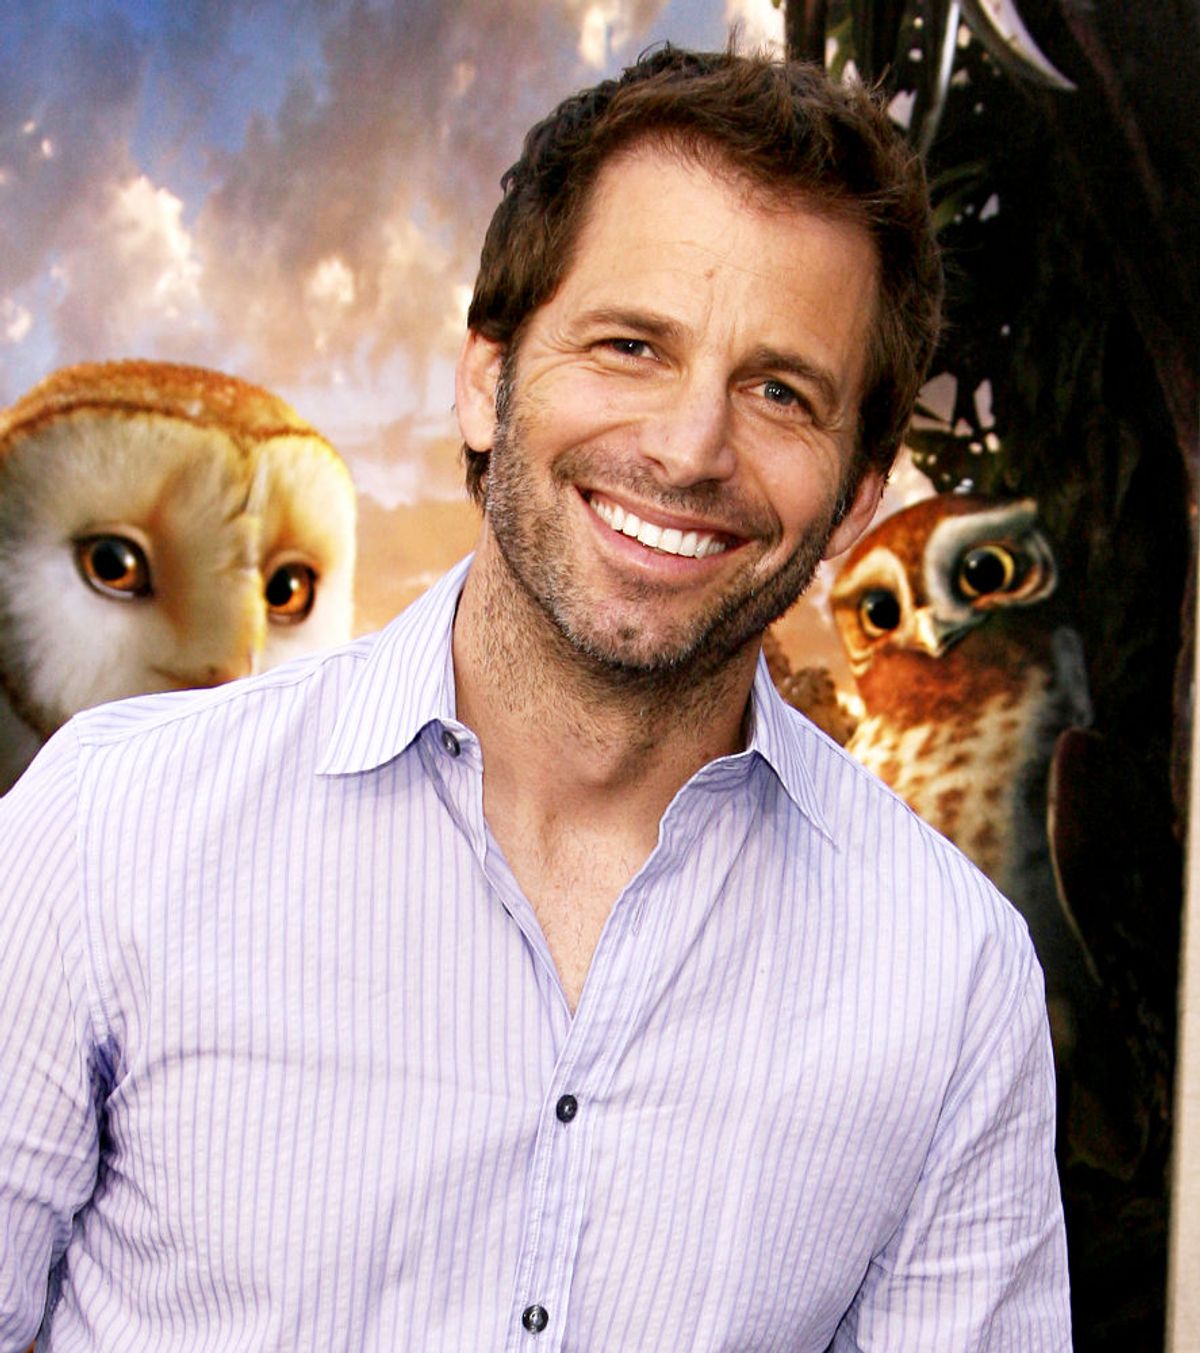 #5753149 Legend of the Guardians: The Owls of Ga'Hoole Premiere held at  The Grauman's Chinese Theatre in Hollywood, California on September 19th, 2010.
Director Zack Snyder























































































 Fame Pictures, Inc - Santa Monica, CA, USA - +1 (310) 395-0500  